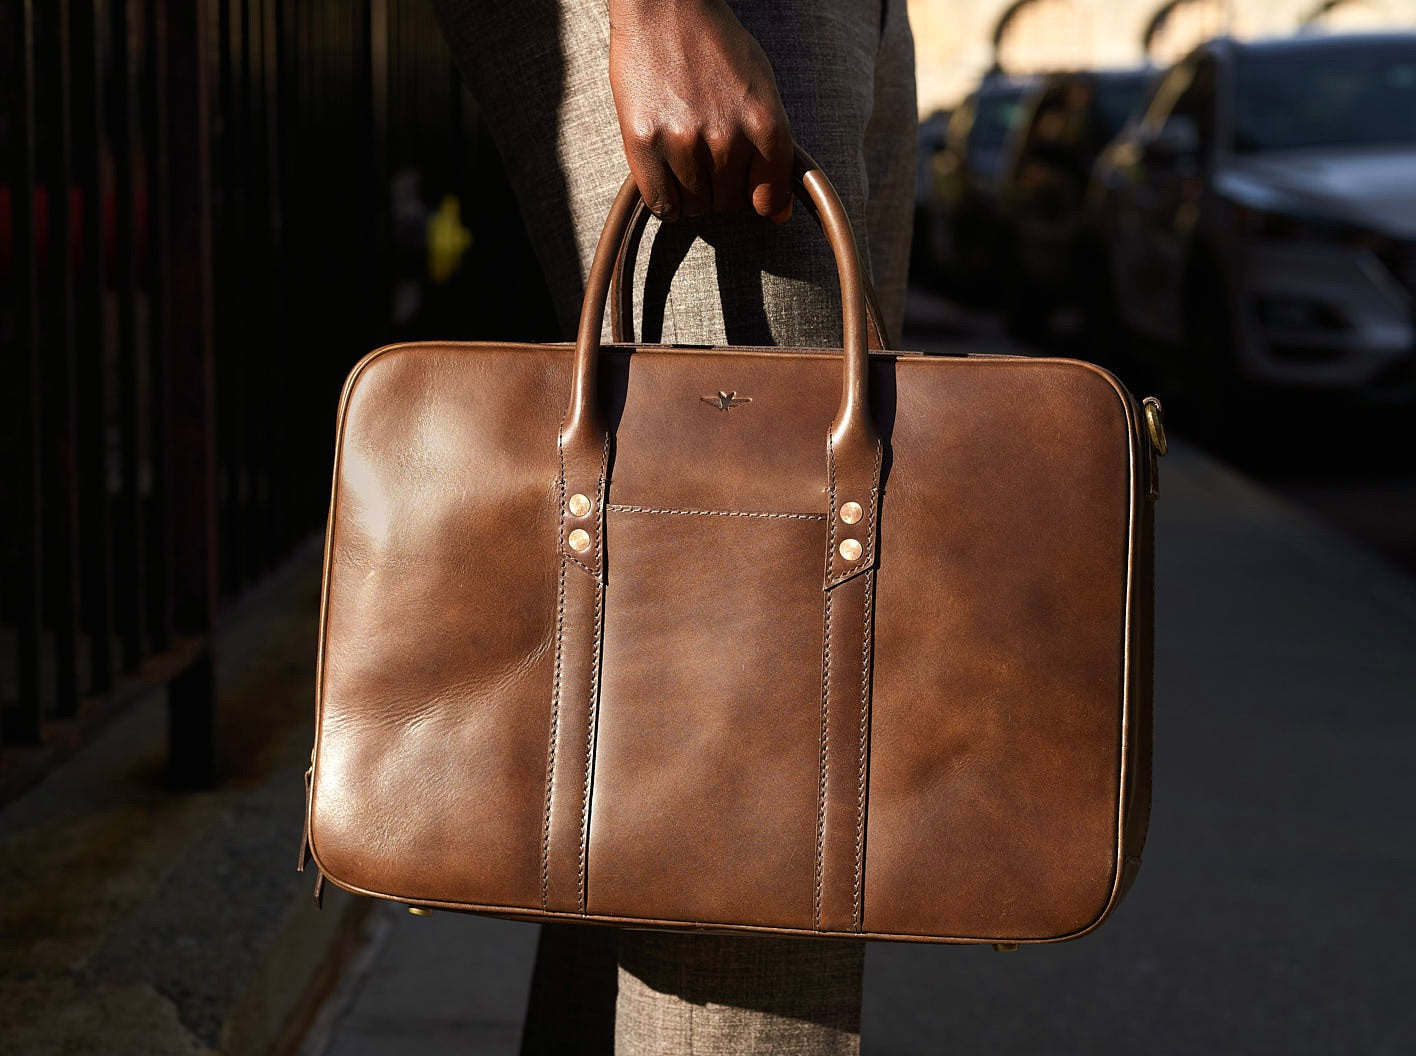 Brown Leather Zippered Briefcase - Satchel & Page Men's Briefcase